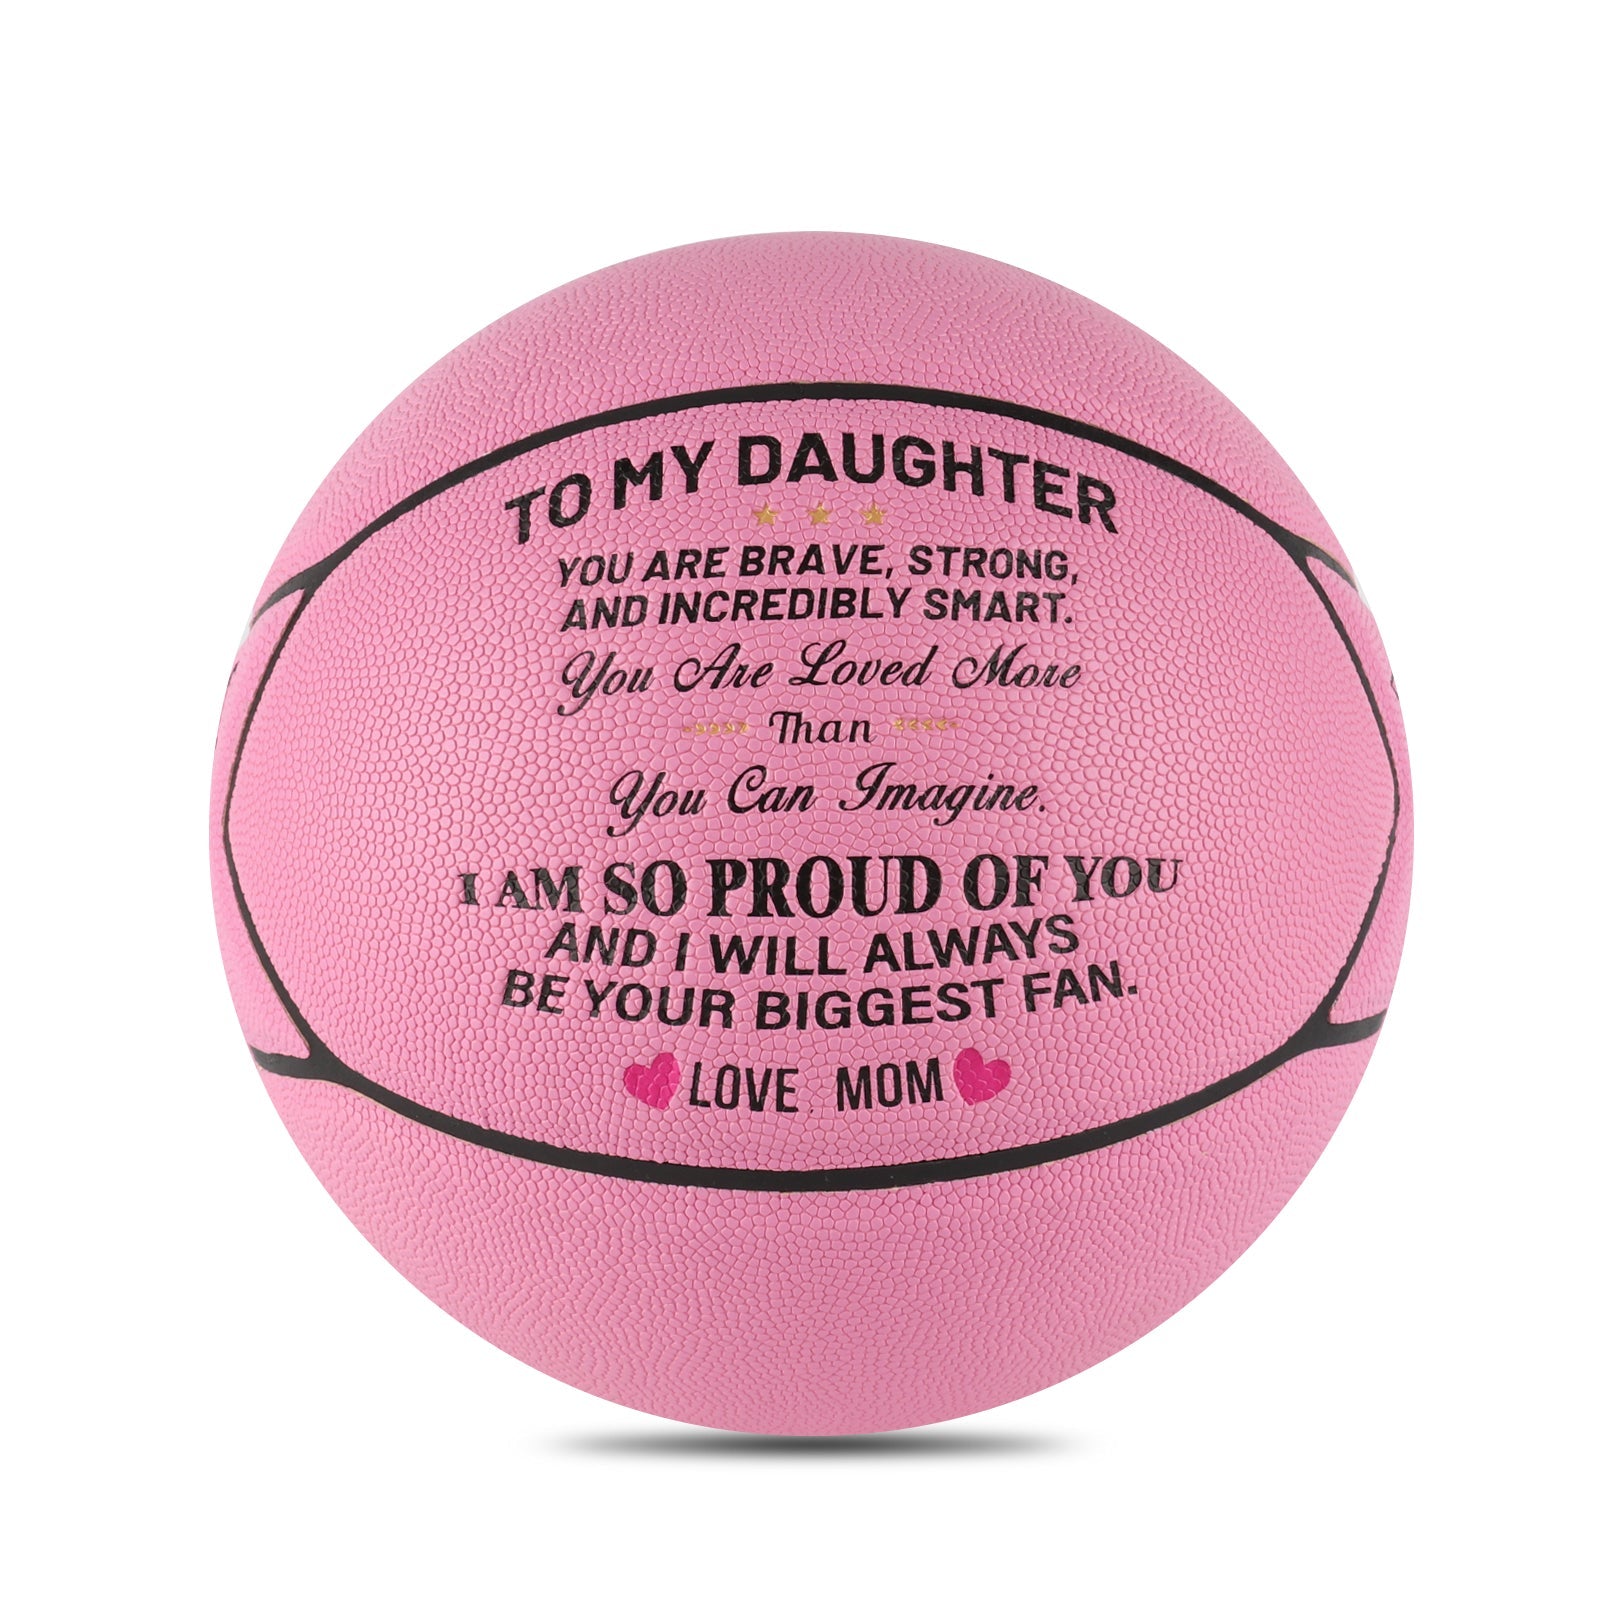 Personalized Letter Basketball For Daughter, Basketball Indoor/Outdoor Game Ball For Girl, Birthday Christmas Gift For Daughter From Mom, Pink - Family Watchs